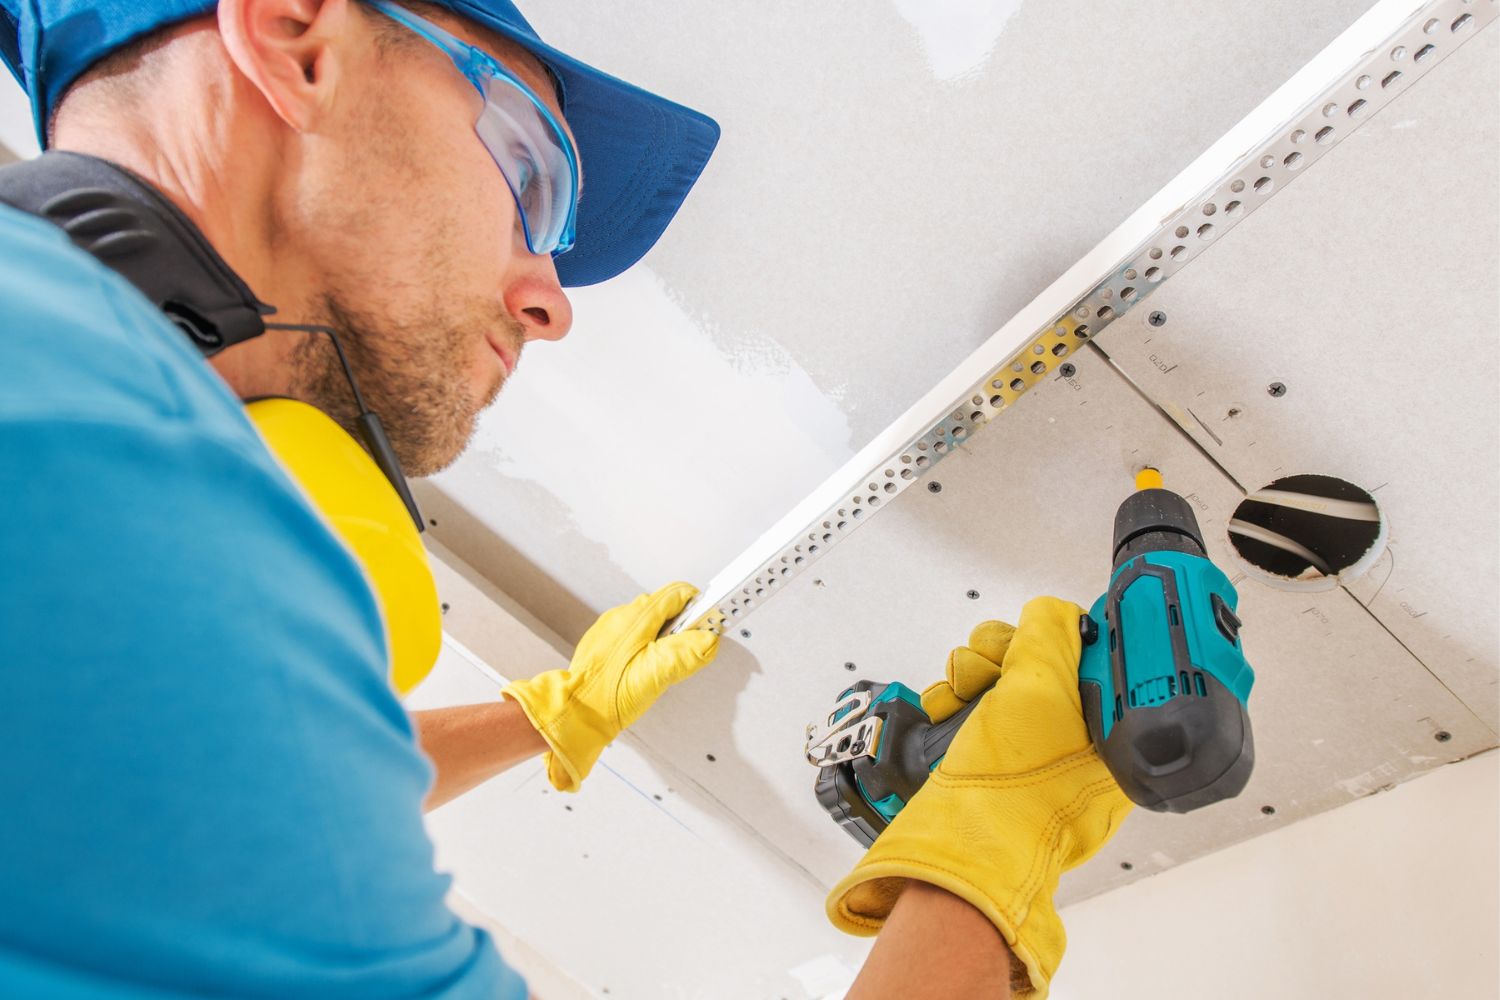 A worker in yellow gloves uses a drill to install drywall.